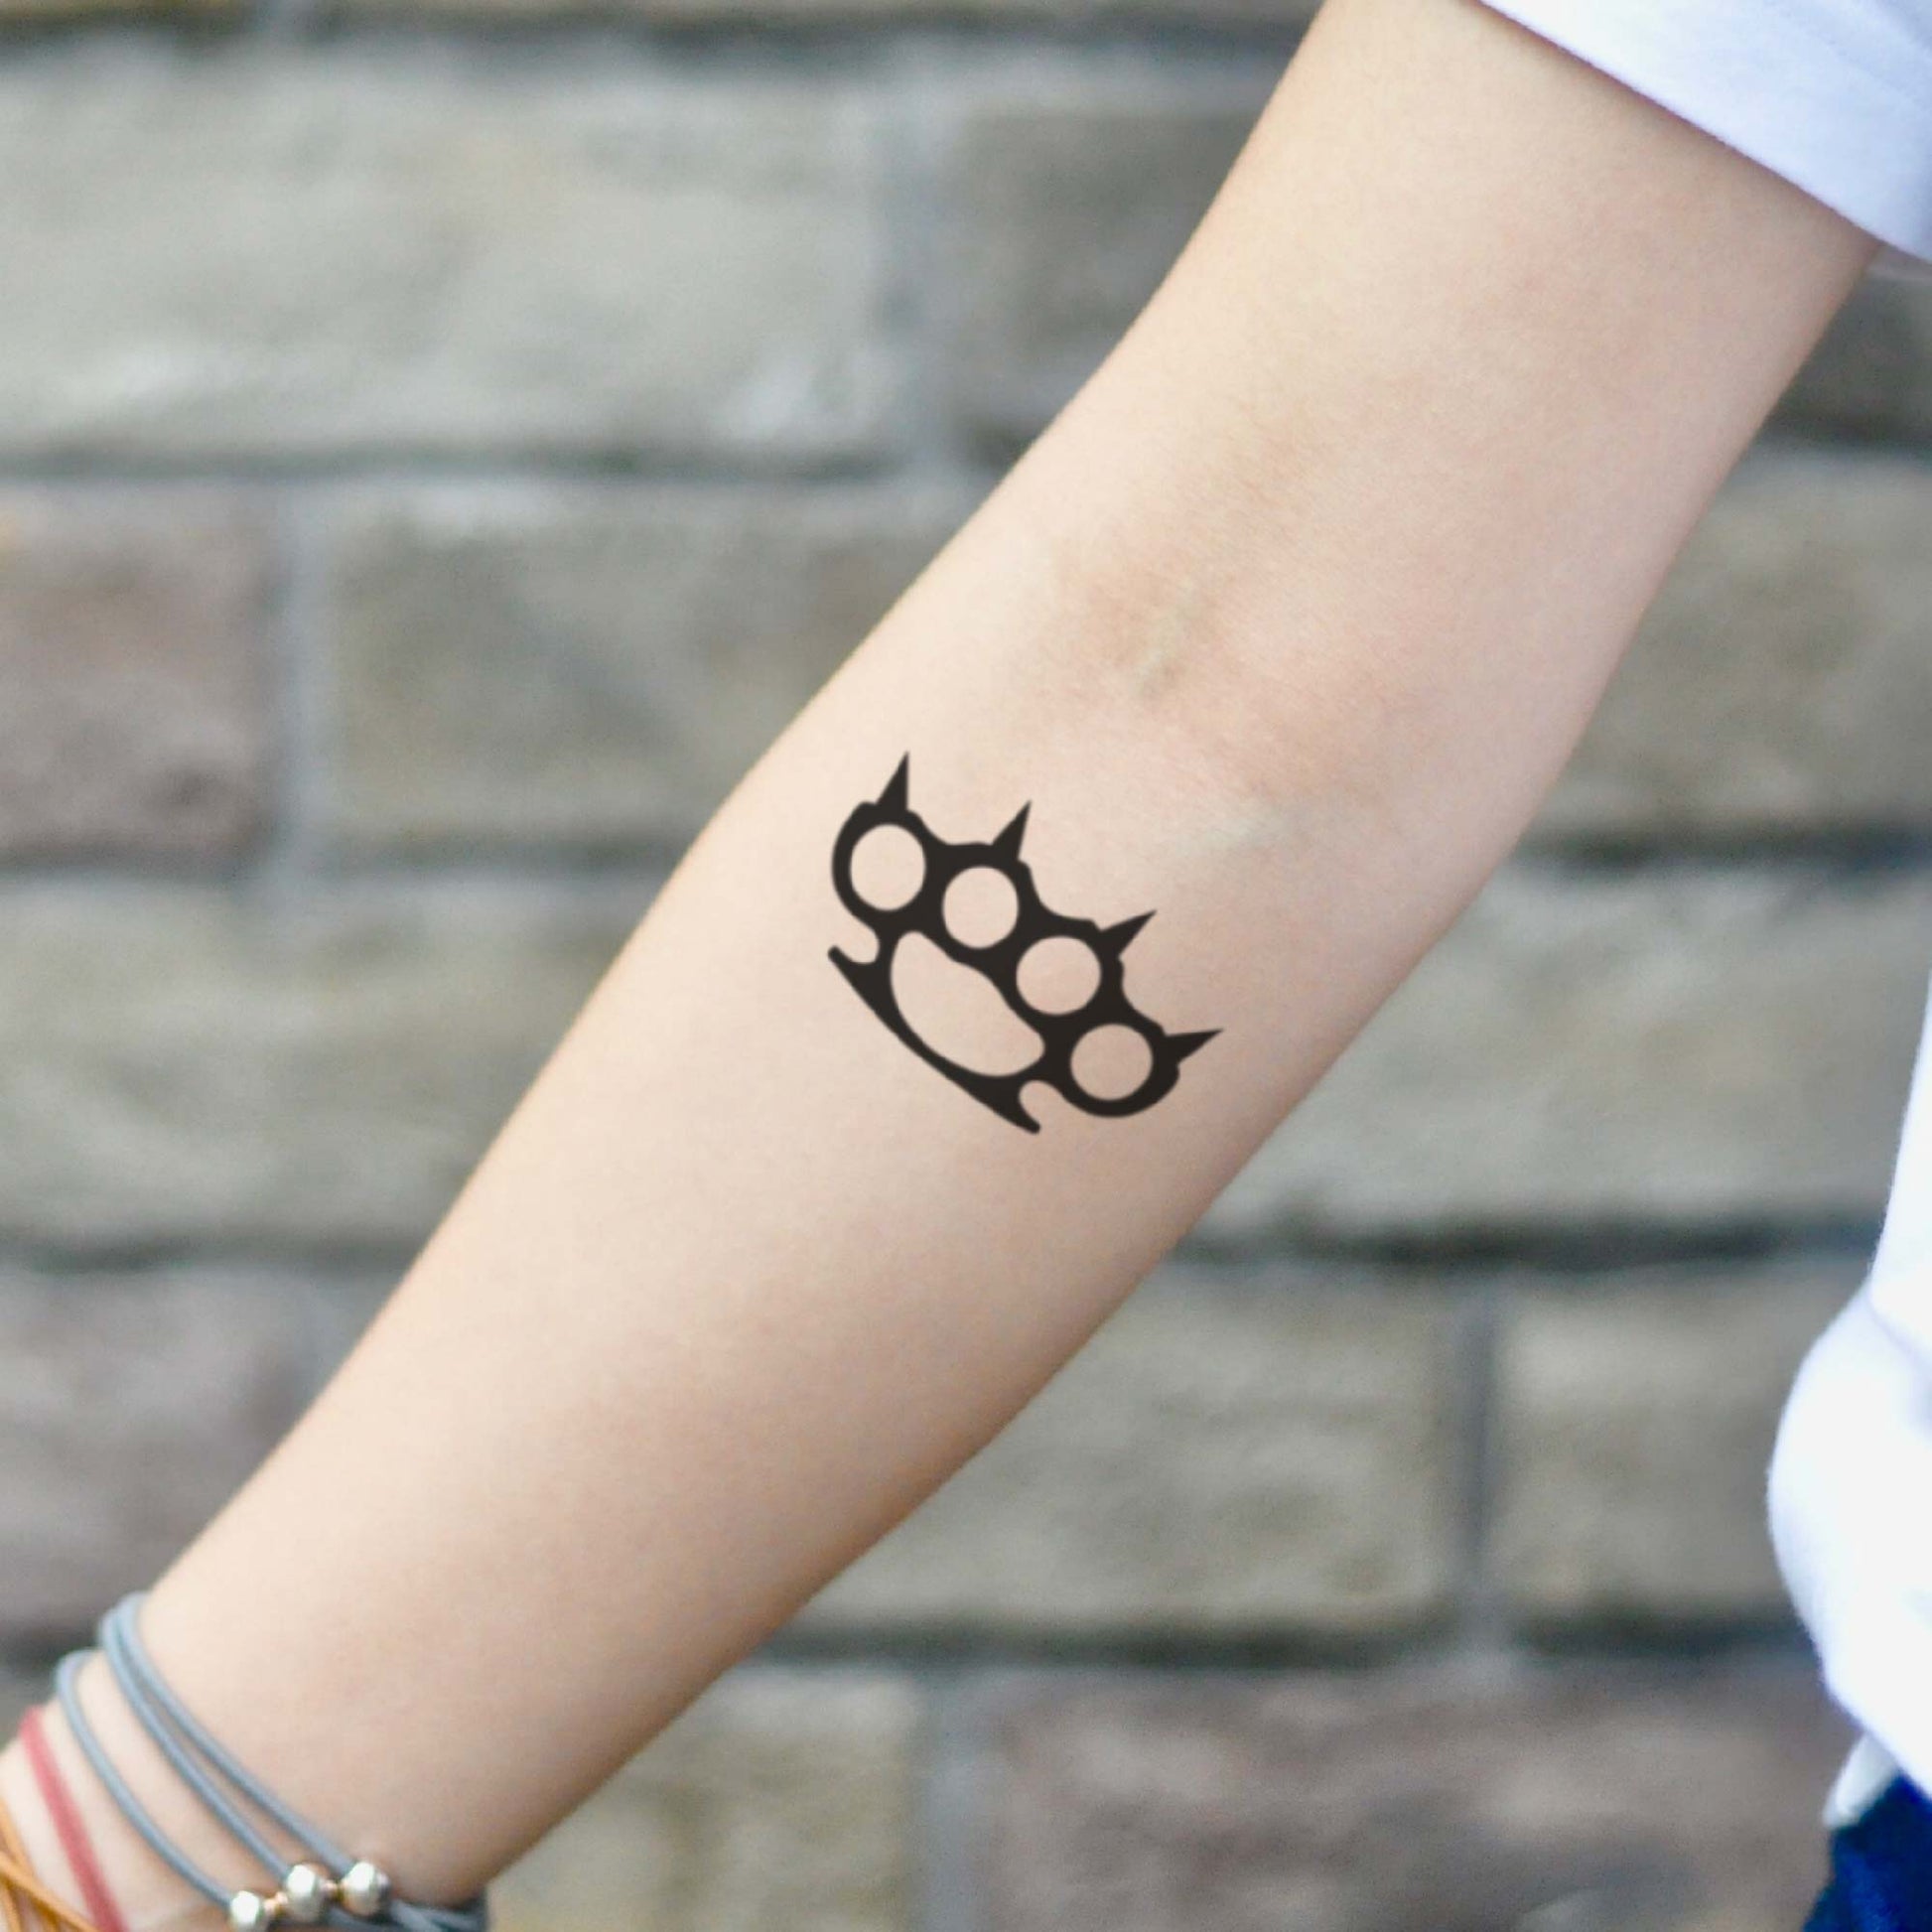 fake small simple spiked brass knuckles old school gangster black minimalist temporary tattoo sticker design idea on inner arm forearm